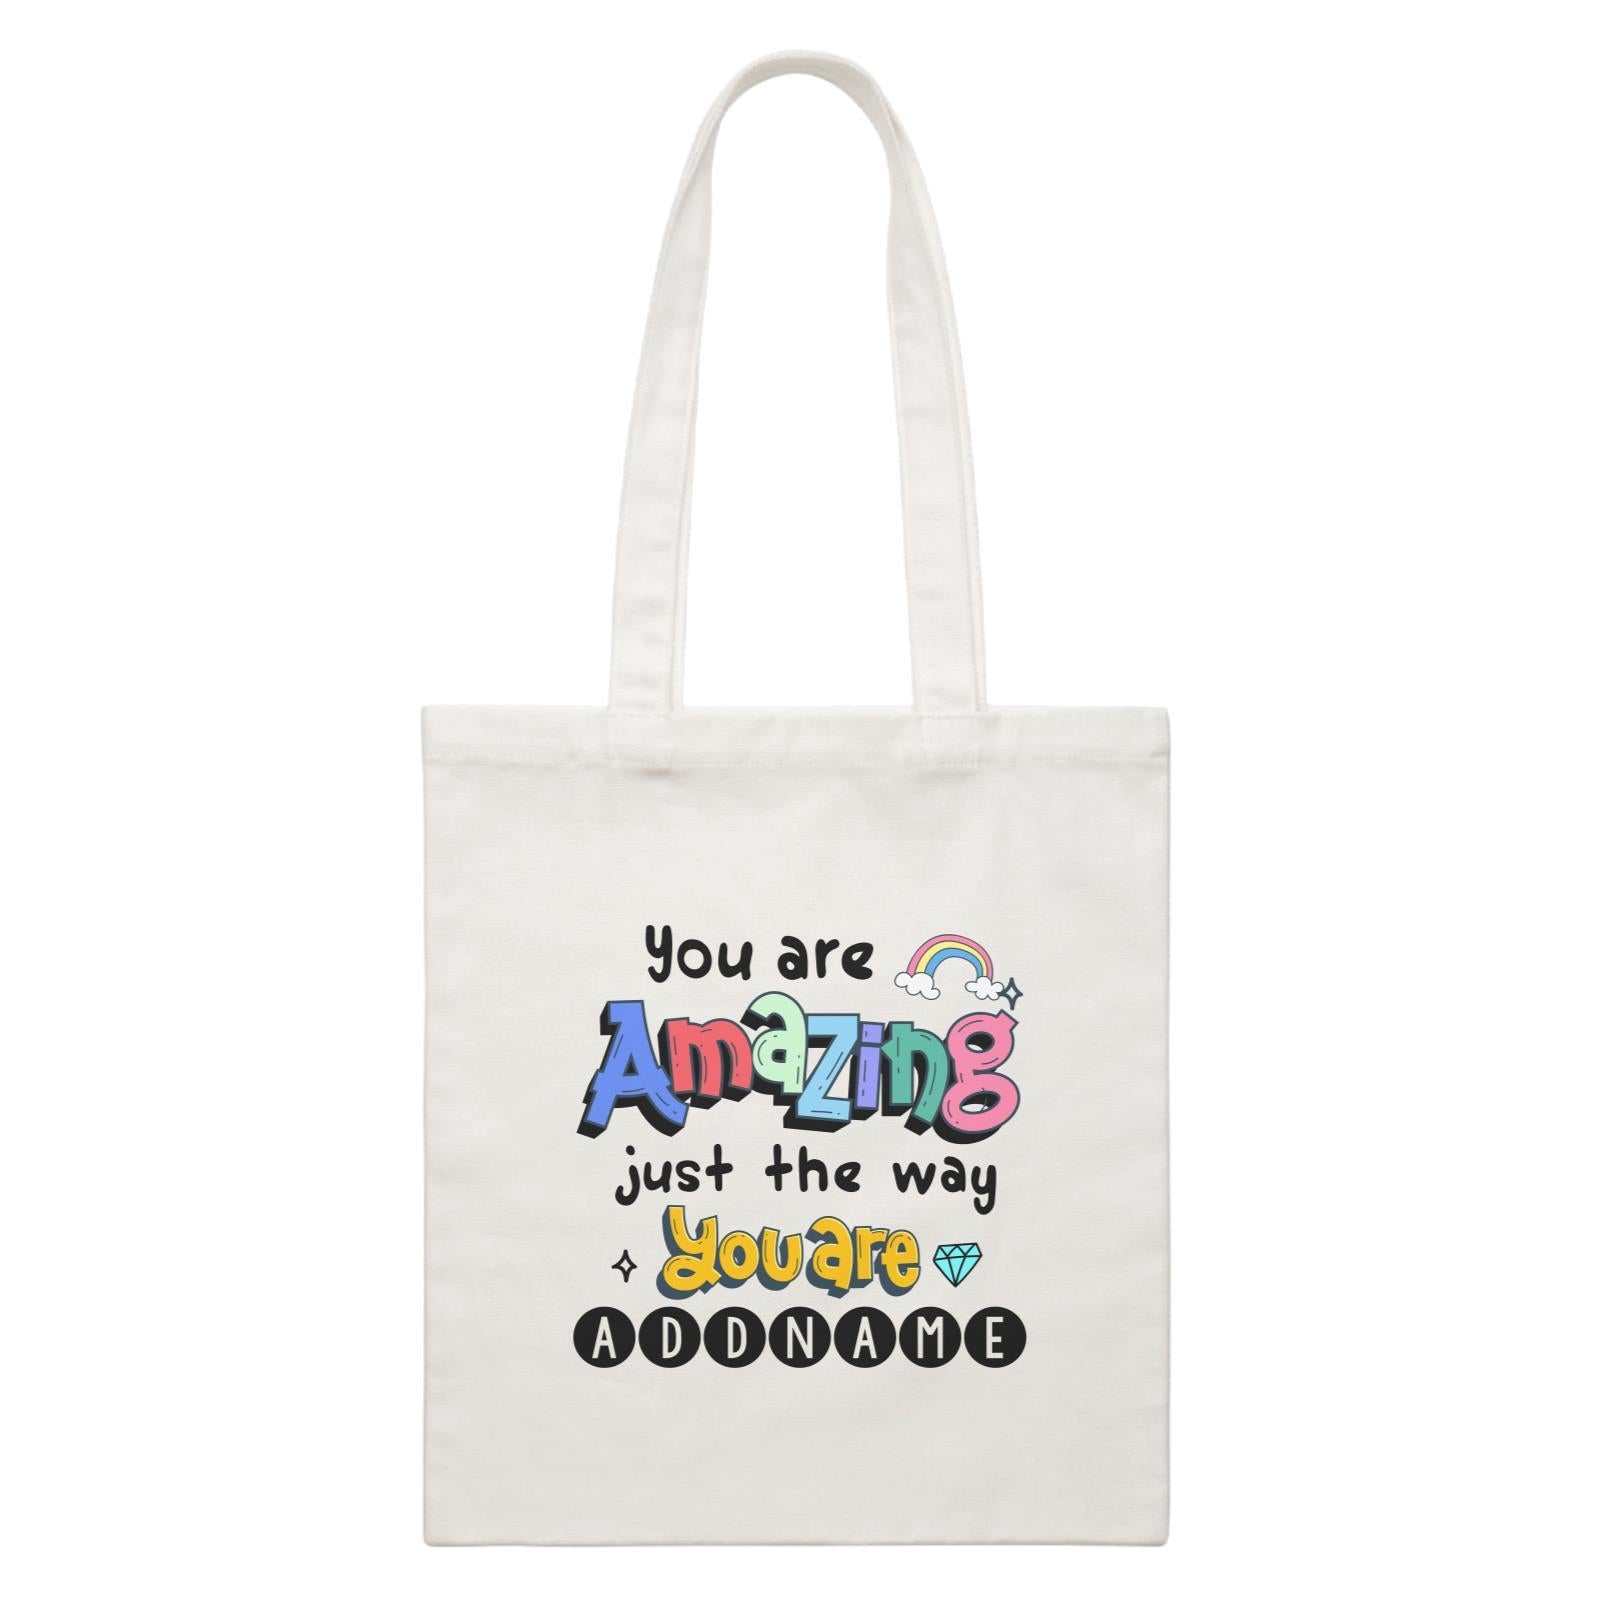 Children's Day Gift Series You Are Amazing Just The Way You Are Addname  Canvas Bag